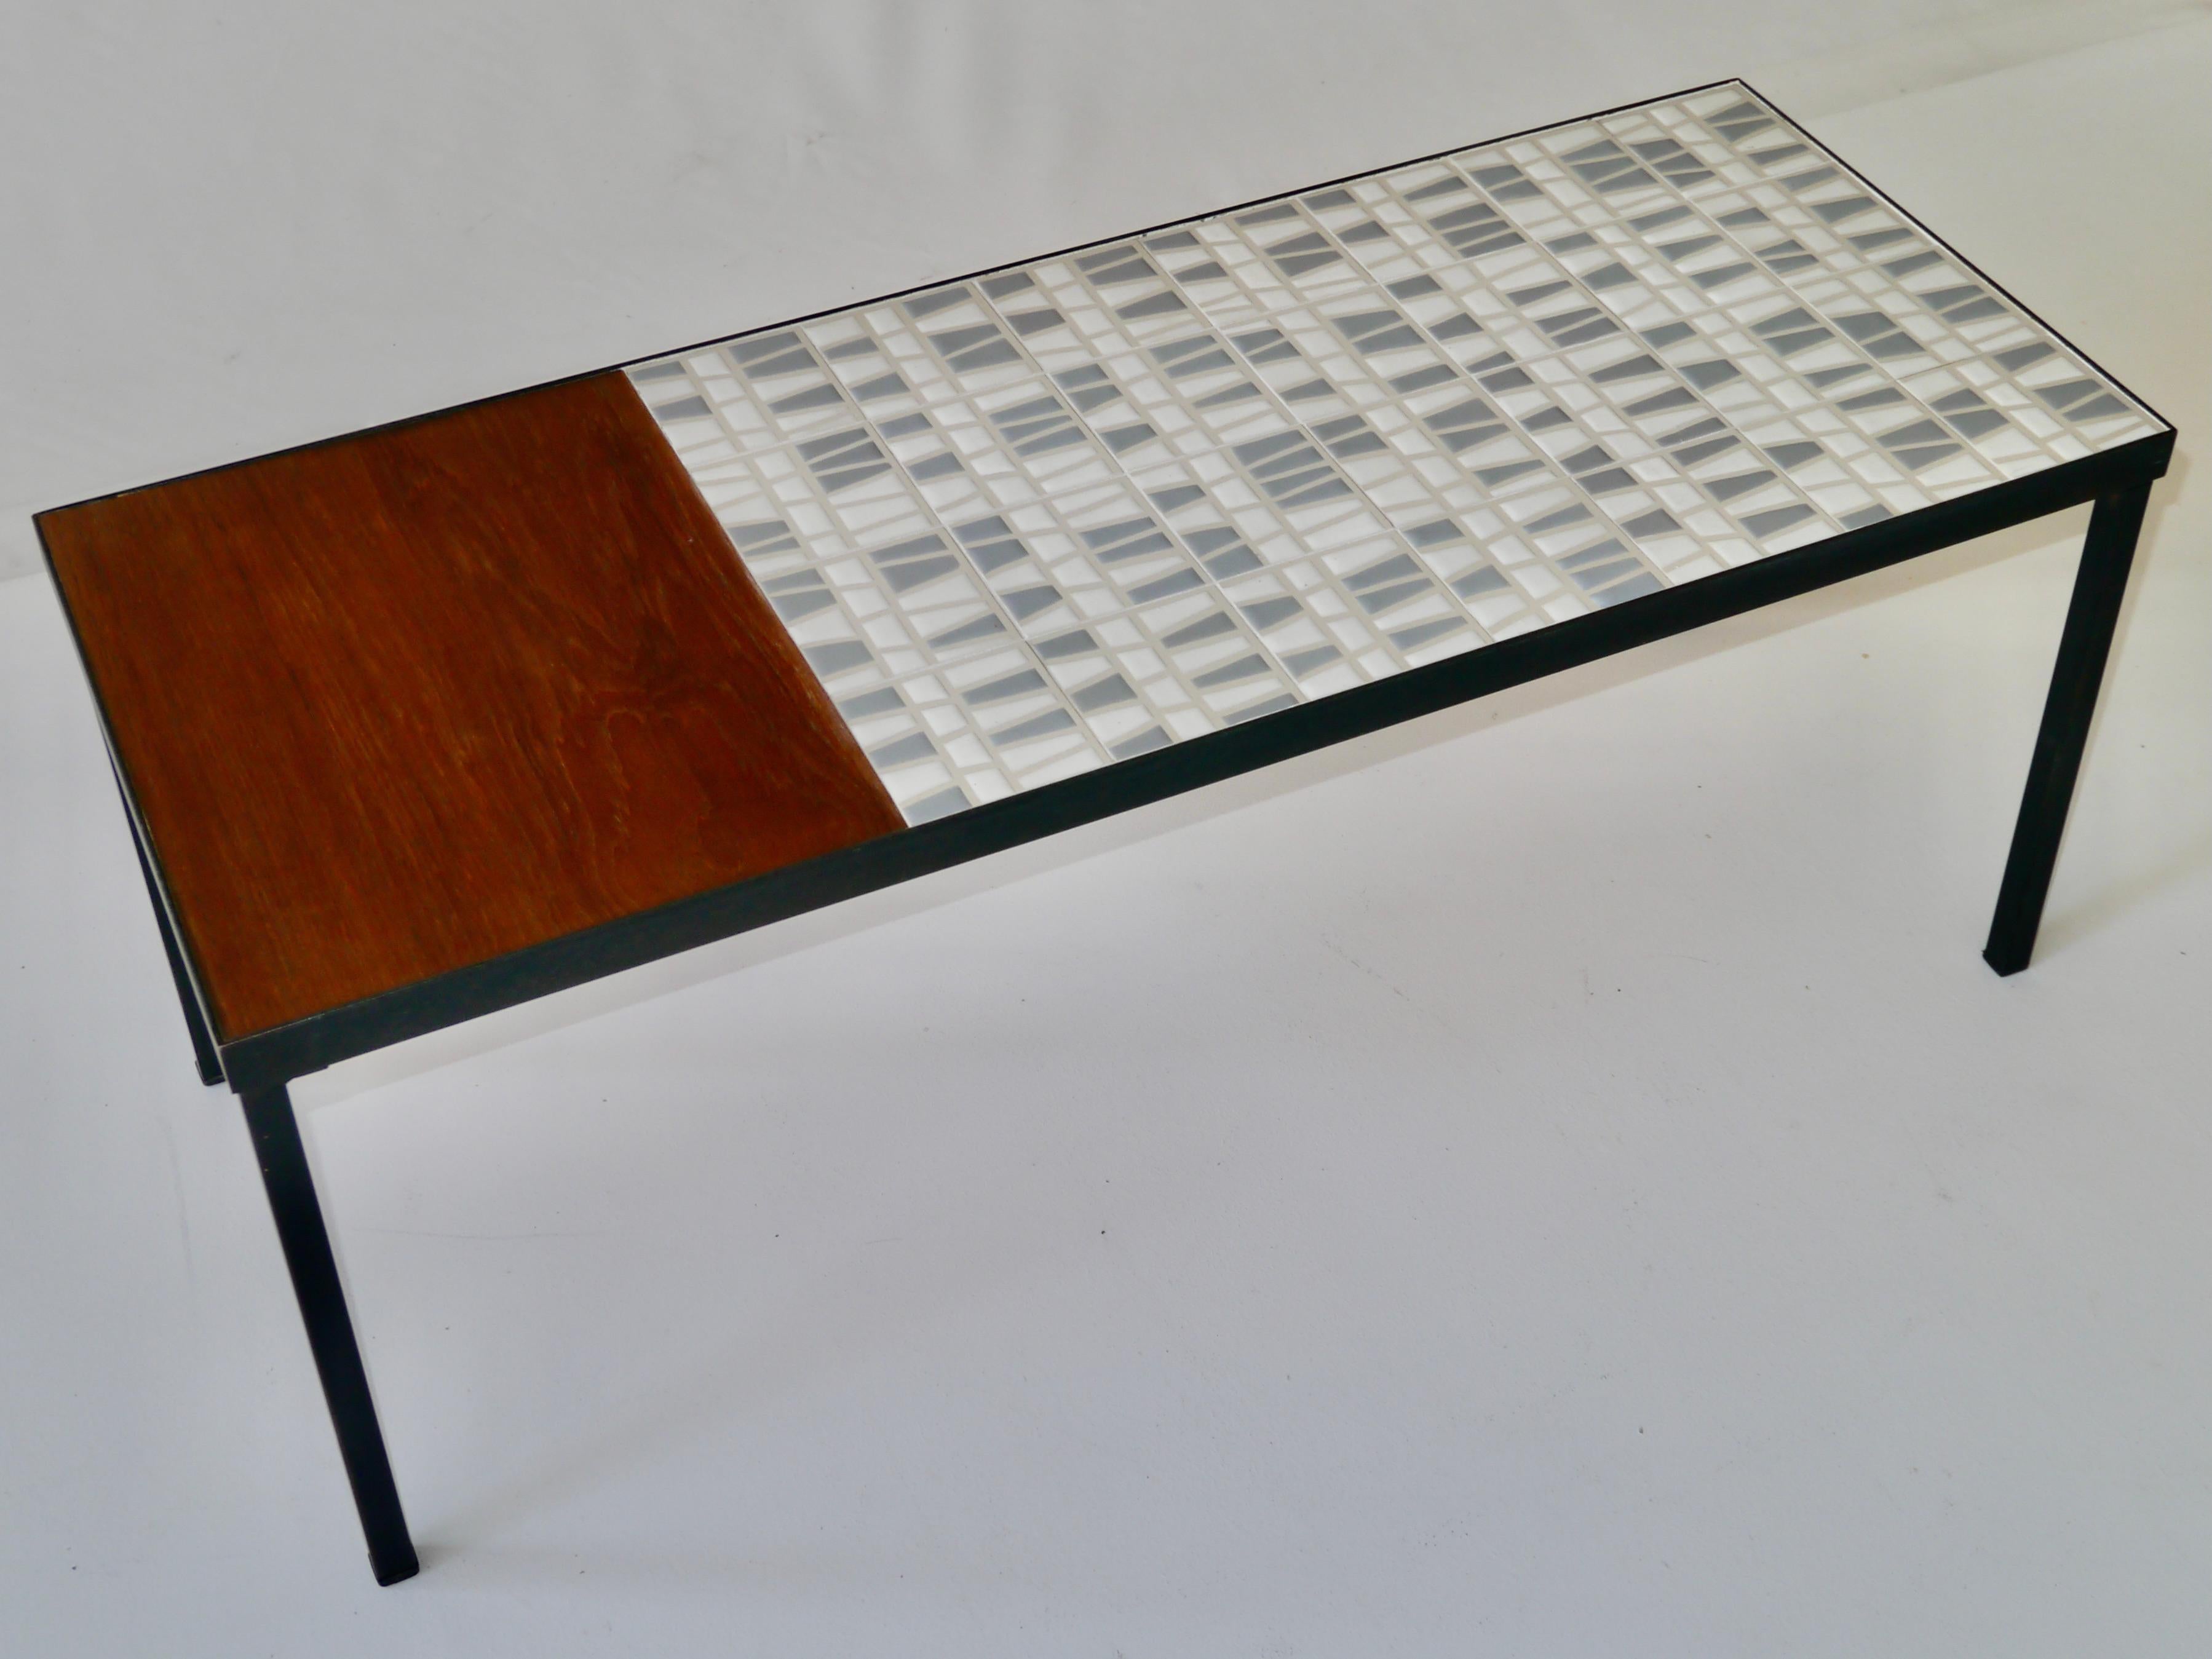 Mid-Century Modern Teak & Ceramic Coffee Table by Roger Capron, France, c. 1960 For Sale